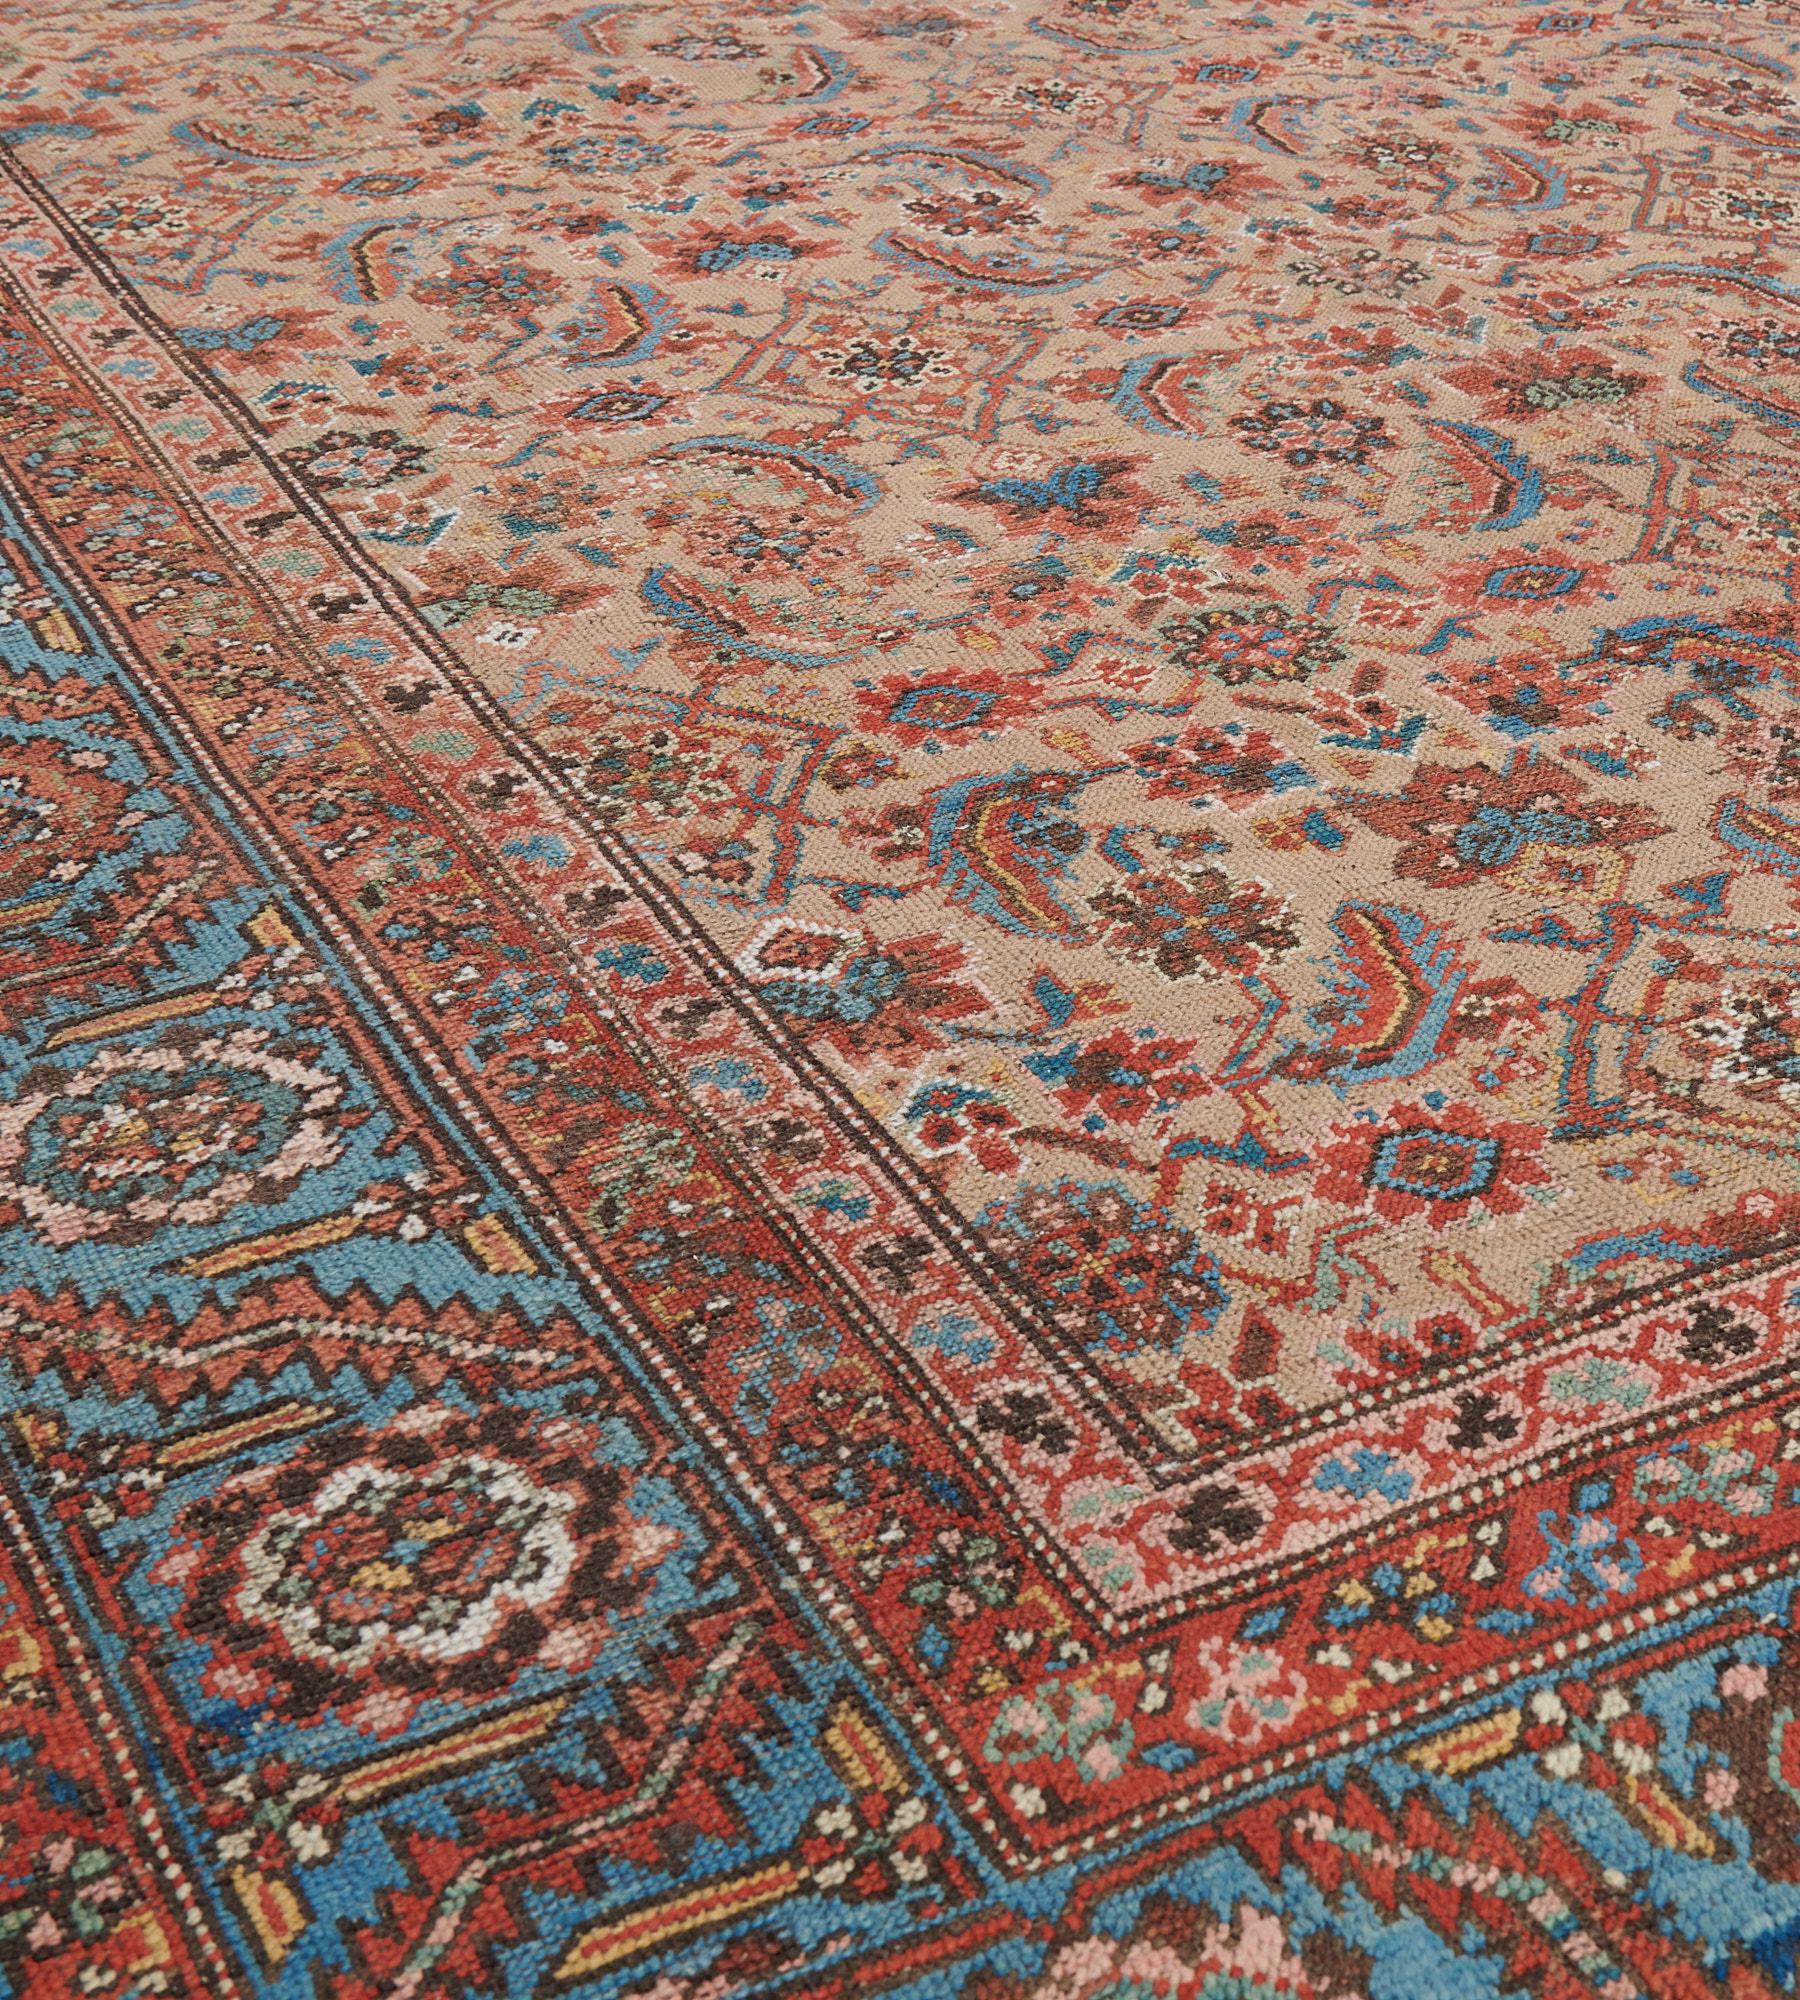 This antique, circa 1880, Bakhshaish rug has a camel-brown field with an overall herati-pattern of light blue, chocolate-brown and brick-red, in a shaded light blue border of serrated leave vine linking polychrome flowerheads and angular floral